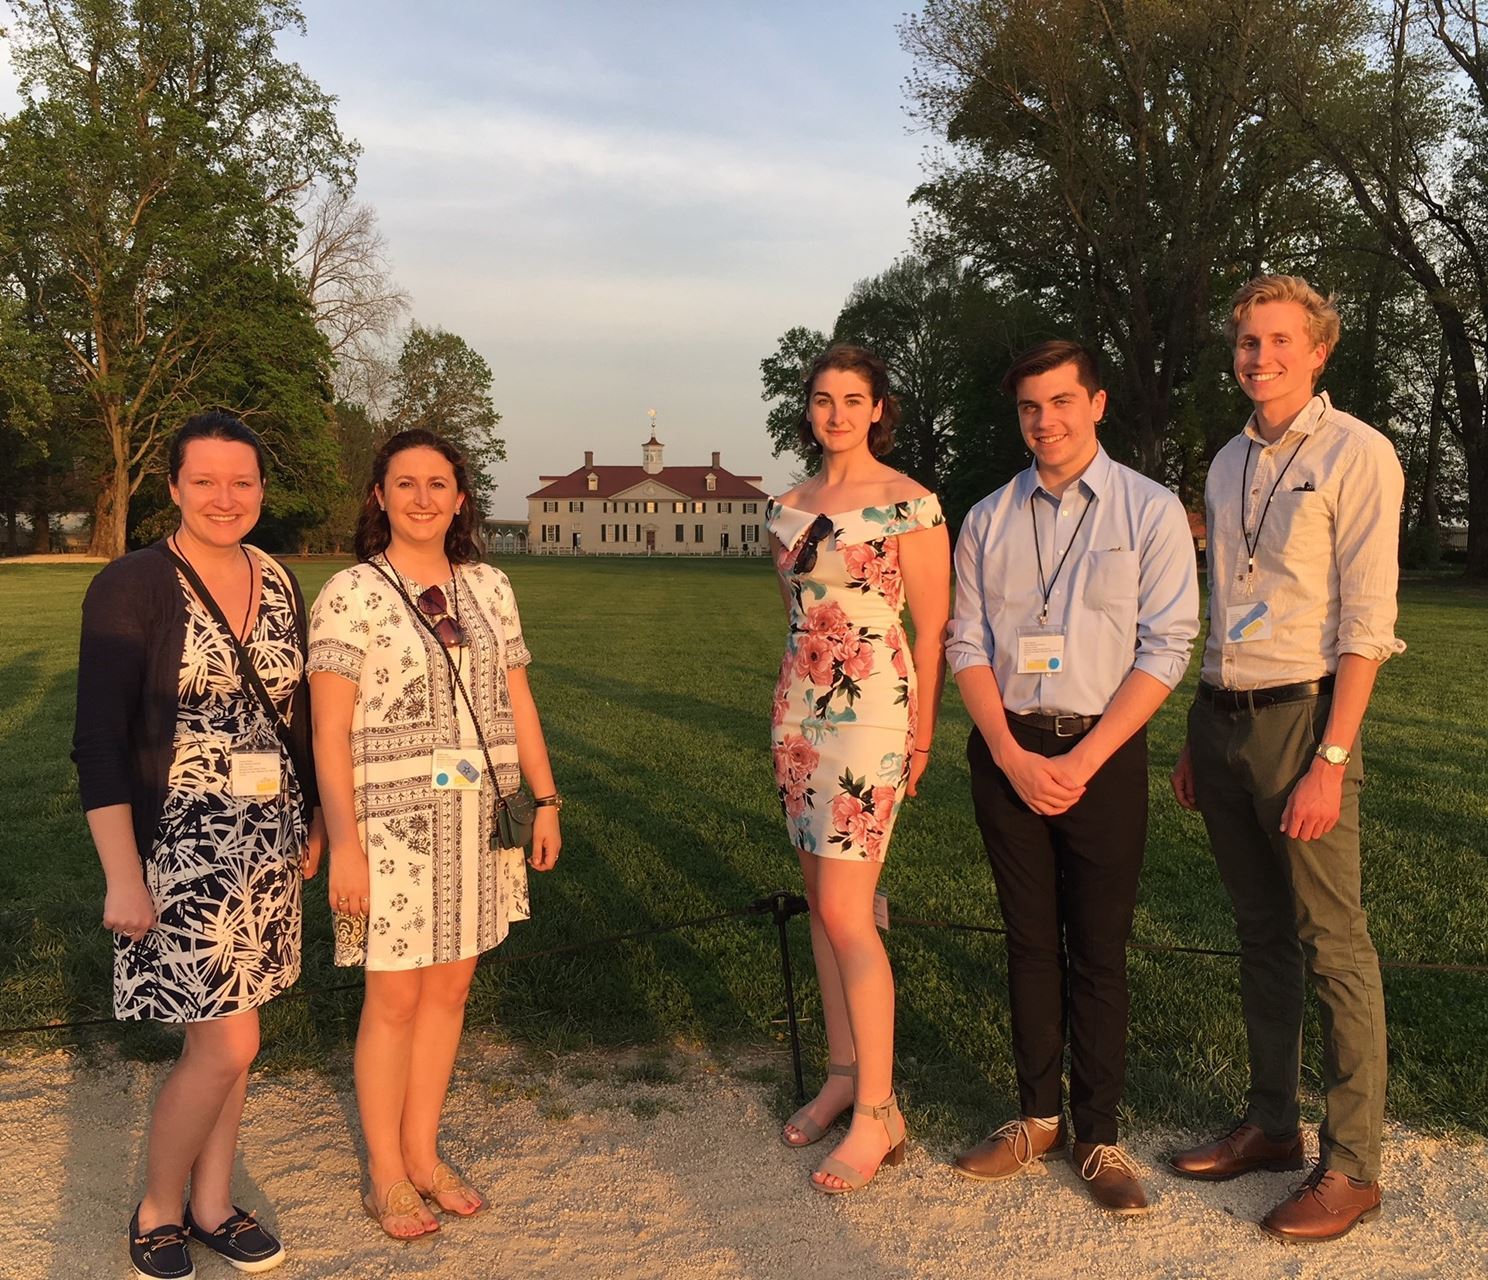 RWU Historic Preservation Program students at Mount Vernon. L to r Chelsea Towers, Sarah Lasky, Olivia Jacinto, Matthew Papineau, Henry Feuss. Photo by Elaine Stiles